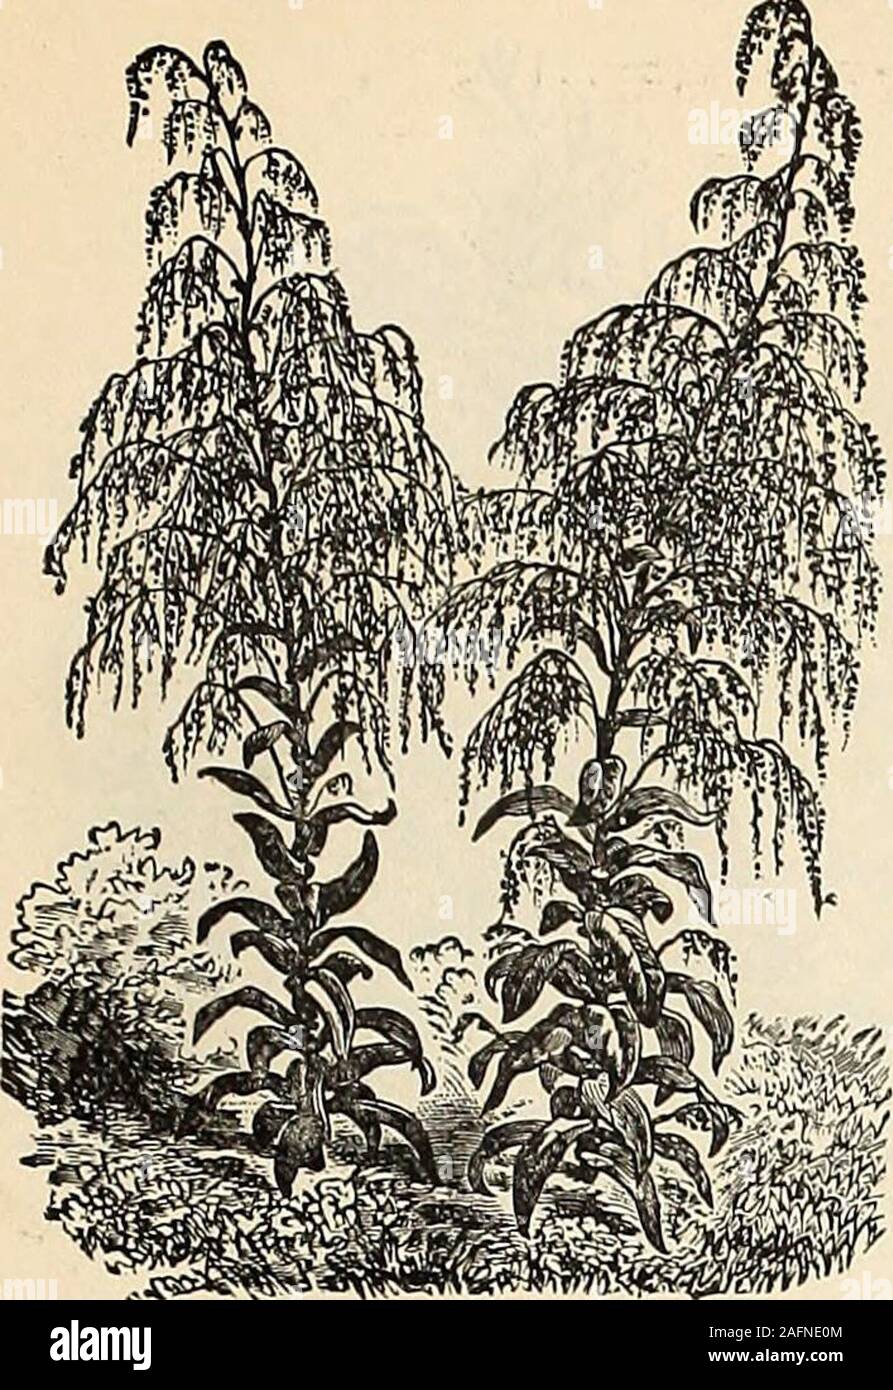 . Manual of everything for the garden : 1894. Oats). Elegant long drooping pani-cles ; height, 2ft 6c. Briza or Quaking Grass. Very pretty seeds suspended togracefully drooping spikes. B. maxima (Large Quaking Grass) 5c. B. gracilis ( Slender Quaking Grass) 6c. Bromus brizseformis. An elegant biennial grass about 2 feethigh; a beautiful object in the mixed border, bearing graceful panicles 5c Coix lachrymse (Jobs Tears). A perennial succeeding as an annual 5c. Gynerium argenteum ( Pampas Grass ). A beautiful lawn plant,bearing large white woolly plumes in the autumn ; forclumps andsub-tropical Stock Photo